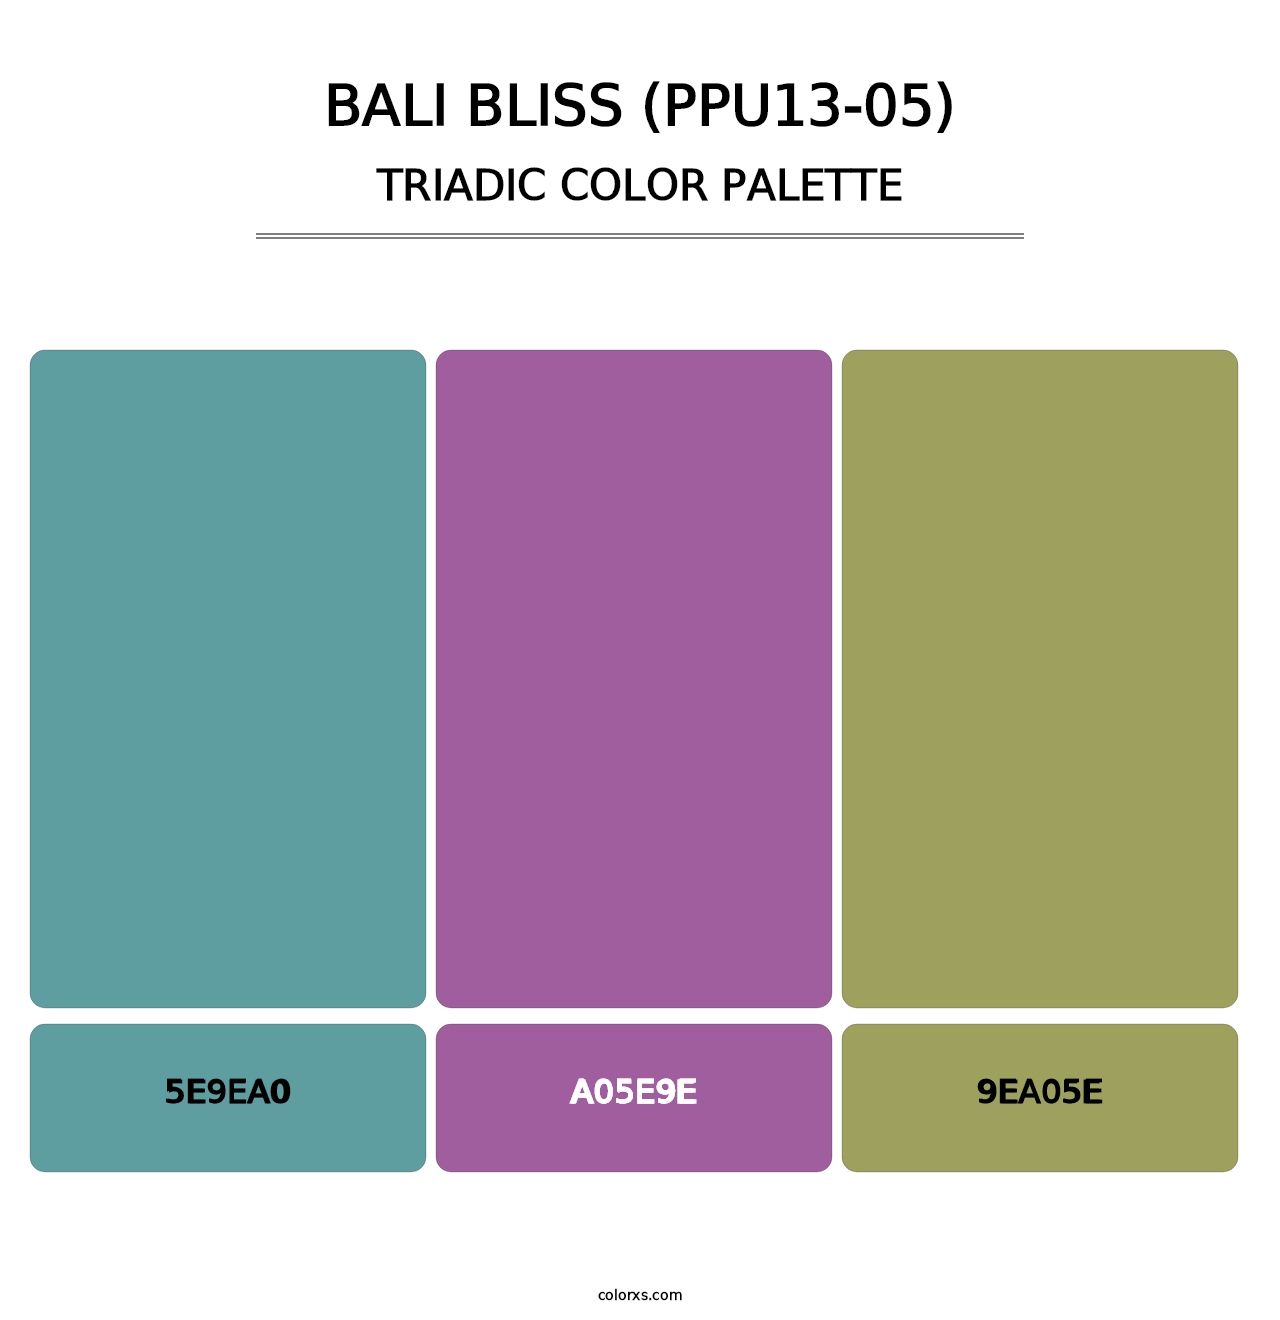 Bali Bliss (PPU13-05) - Triadic Color Palette